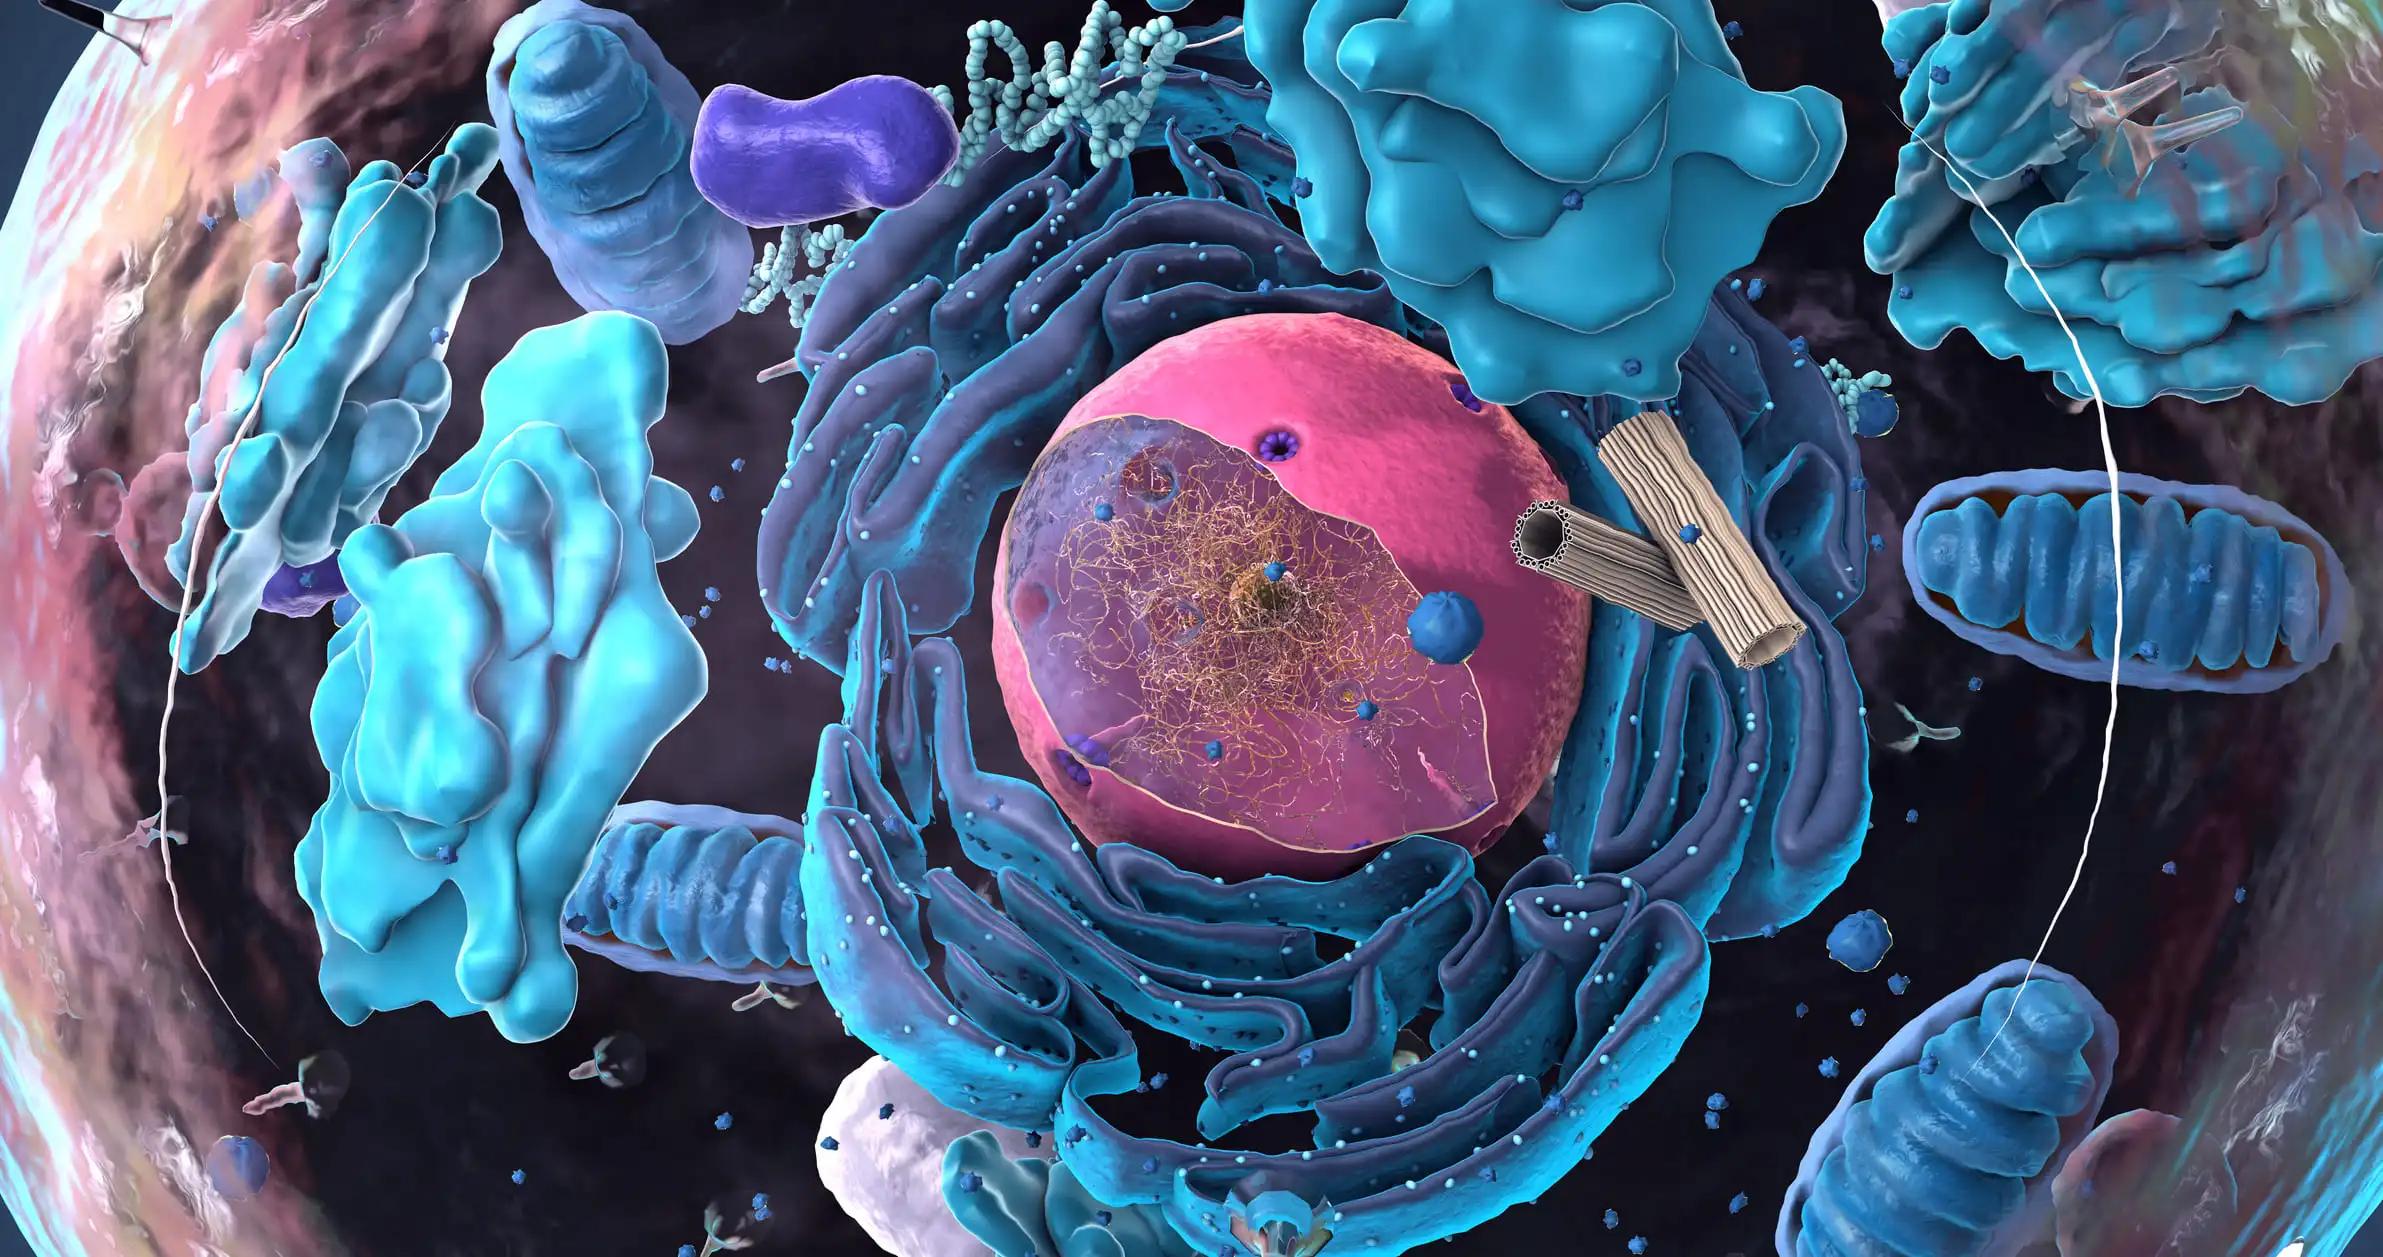 3D View of Eukaryotic Cell and Plasma Membrane